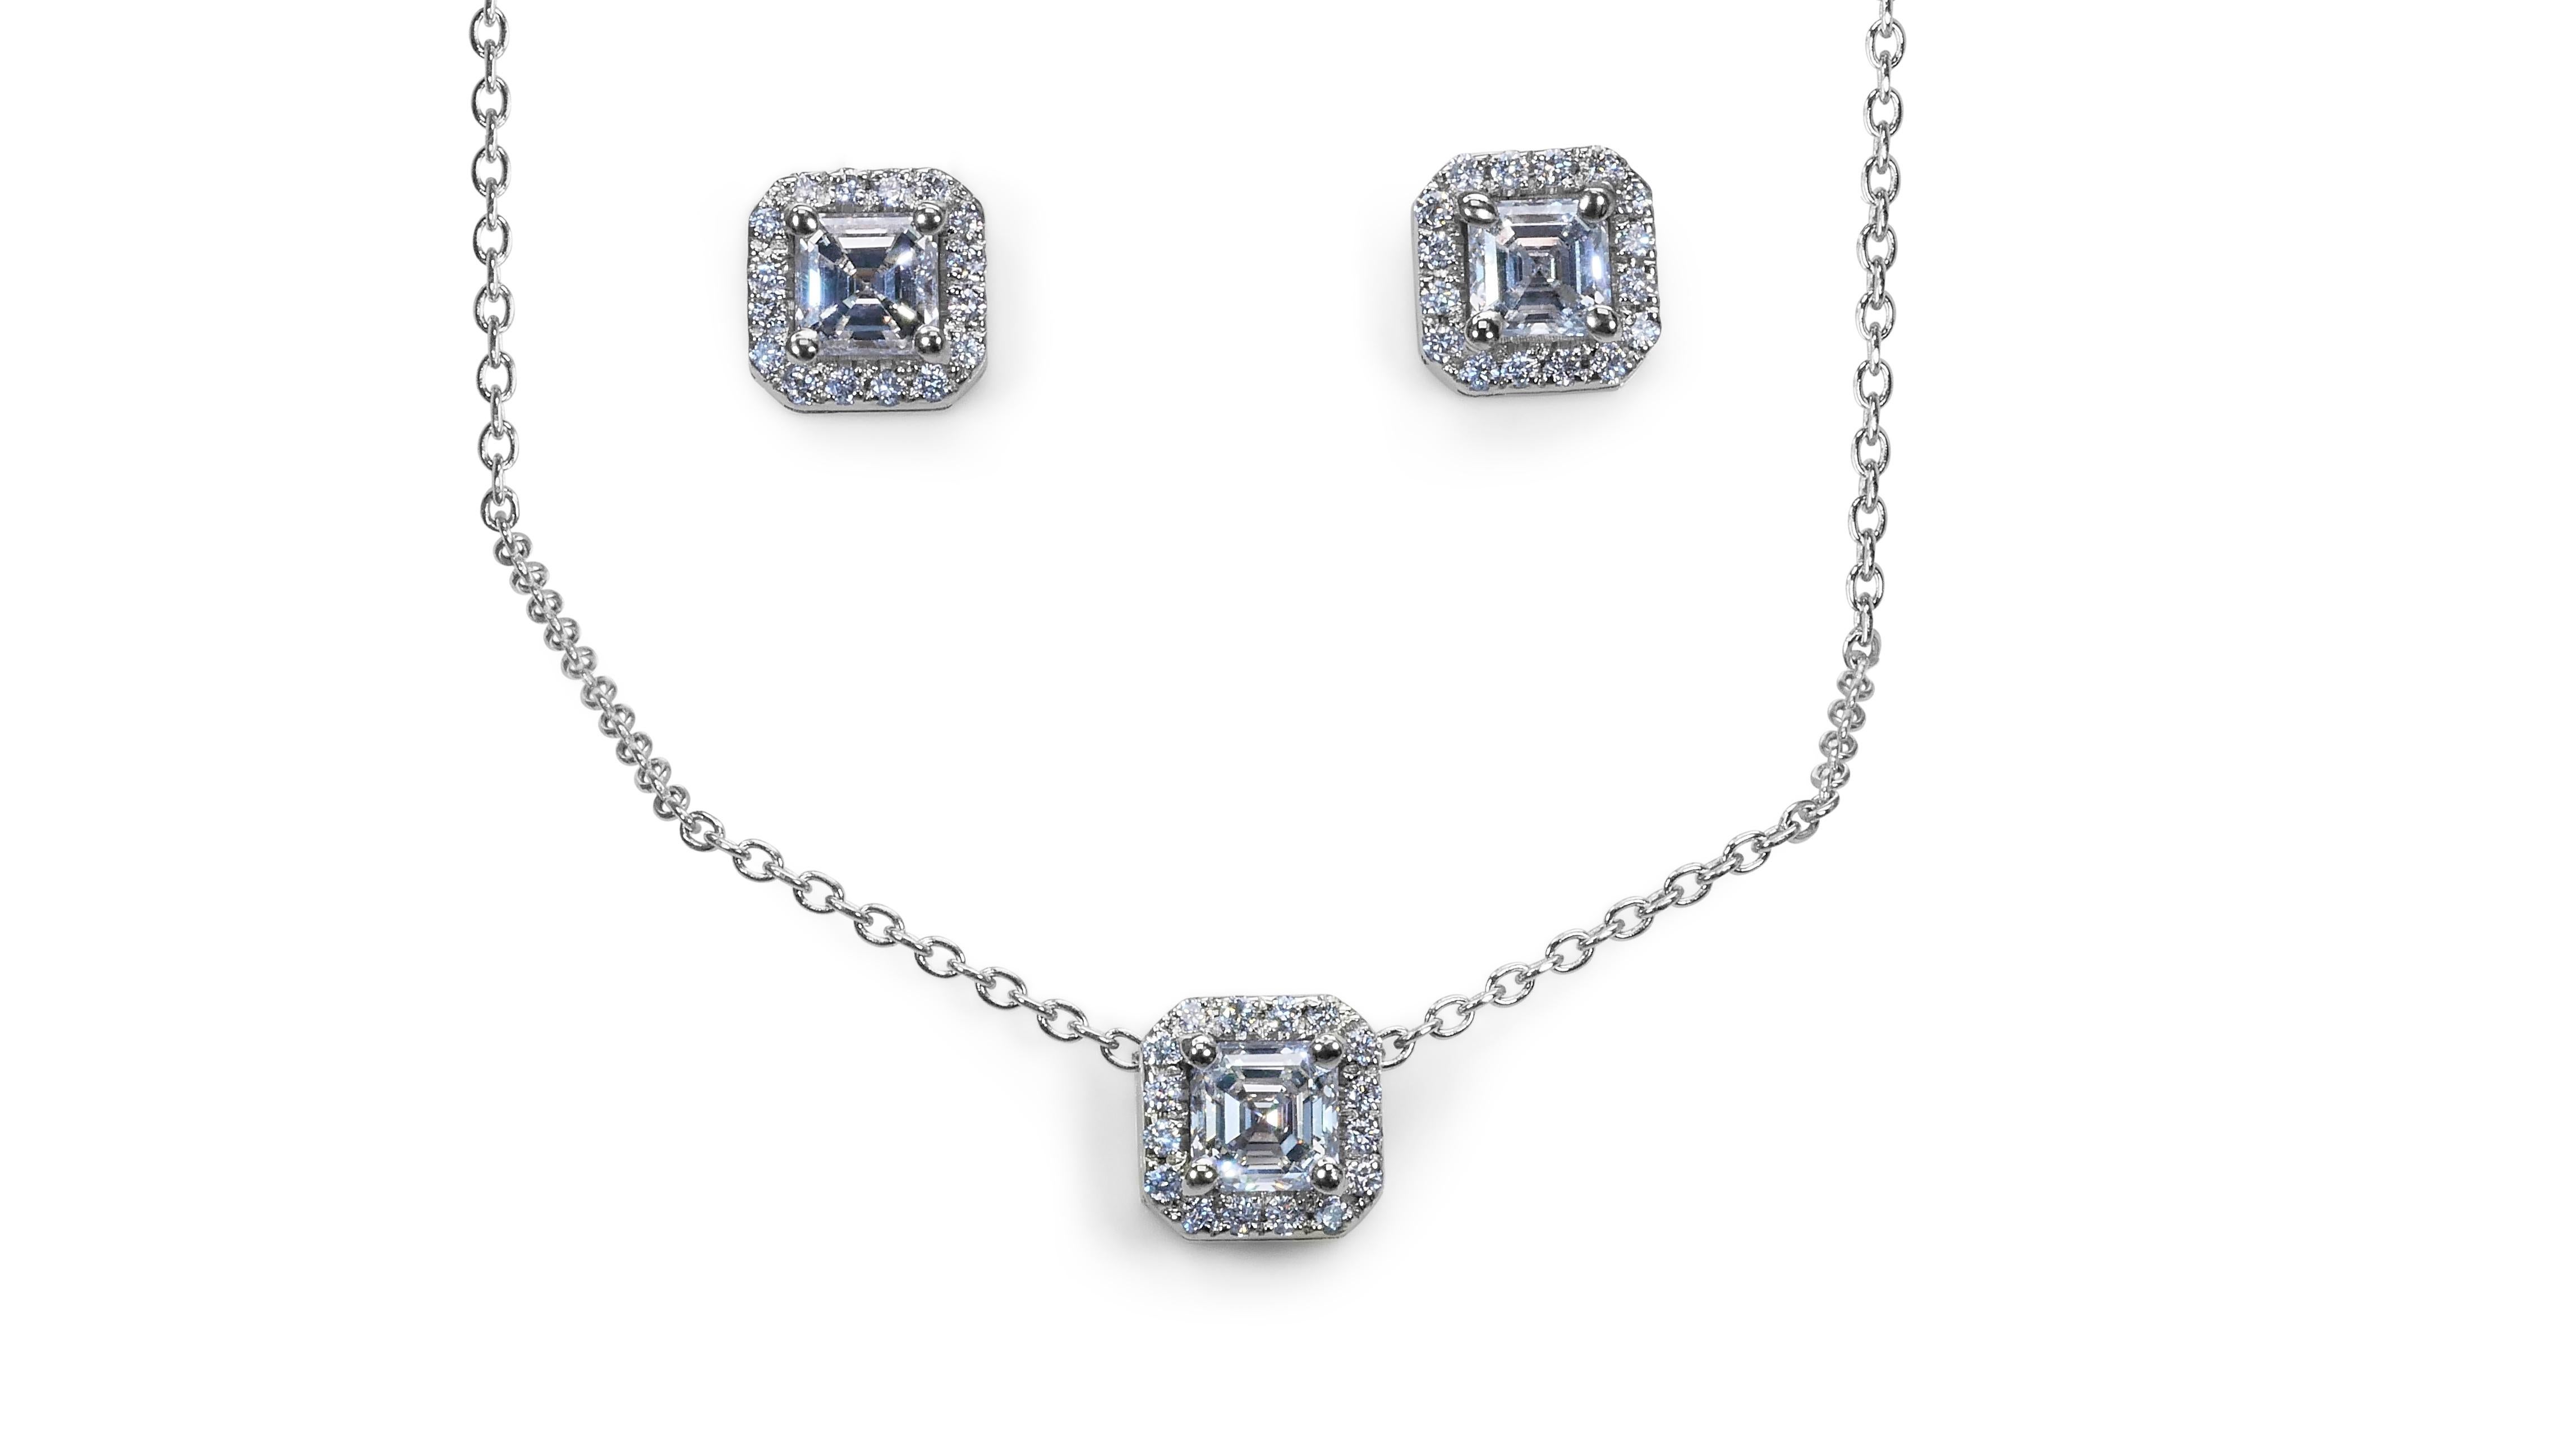 Emerald Cut 18k White Gold Set of Necklace and Earrings W/ 1.2 Ct Natural Diamonds IGI Cert